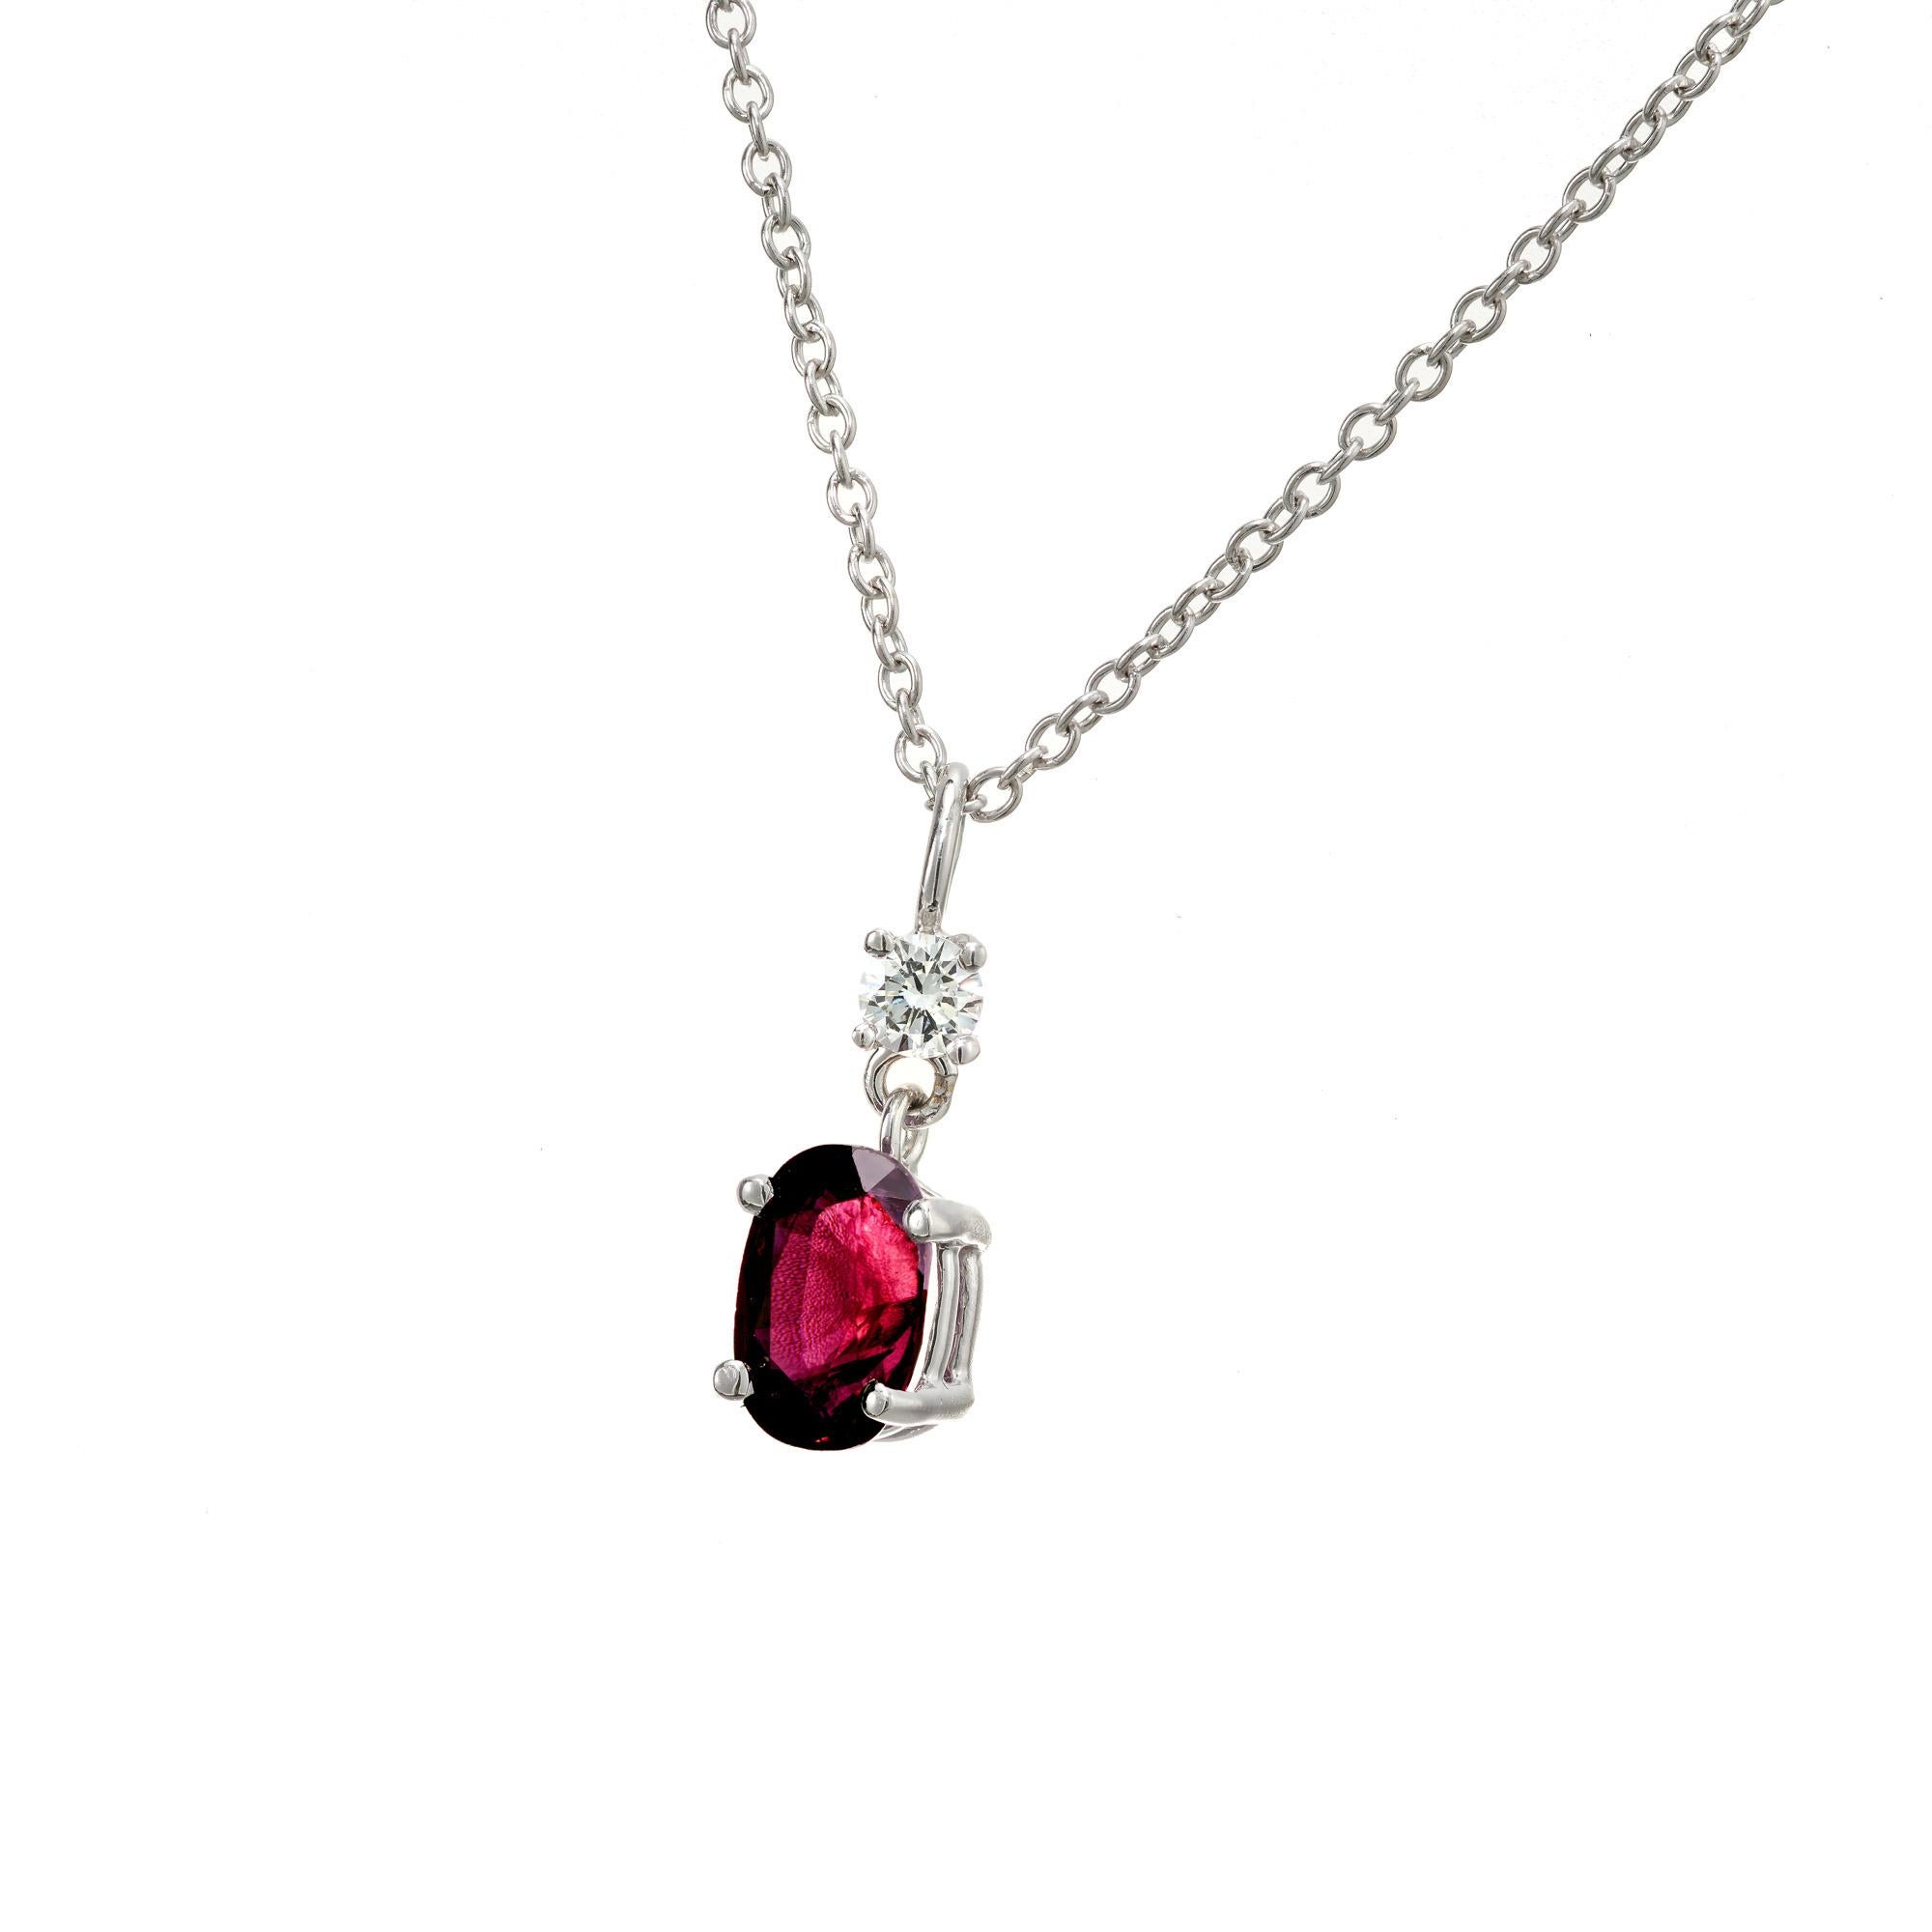 Ruby and diamond pendant necklace. GIA certified .76ct oval purple/ red ruby with 1 round accent diamond, set in a 14k white gold setting. 16 inch gold chain. The ruby is natural, simple heat only.  Designed and crafted in the Peter Suchy